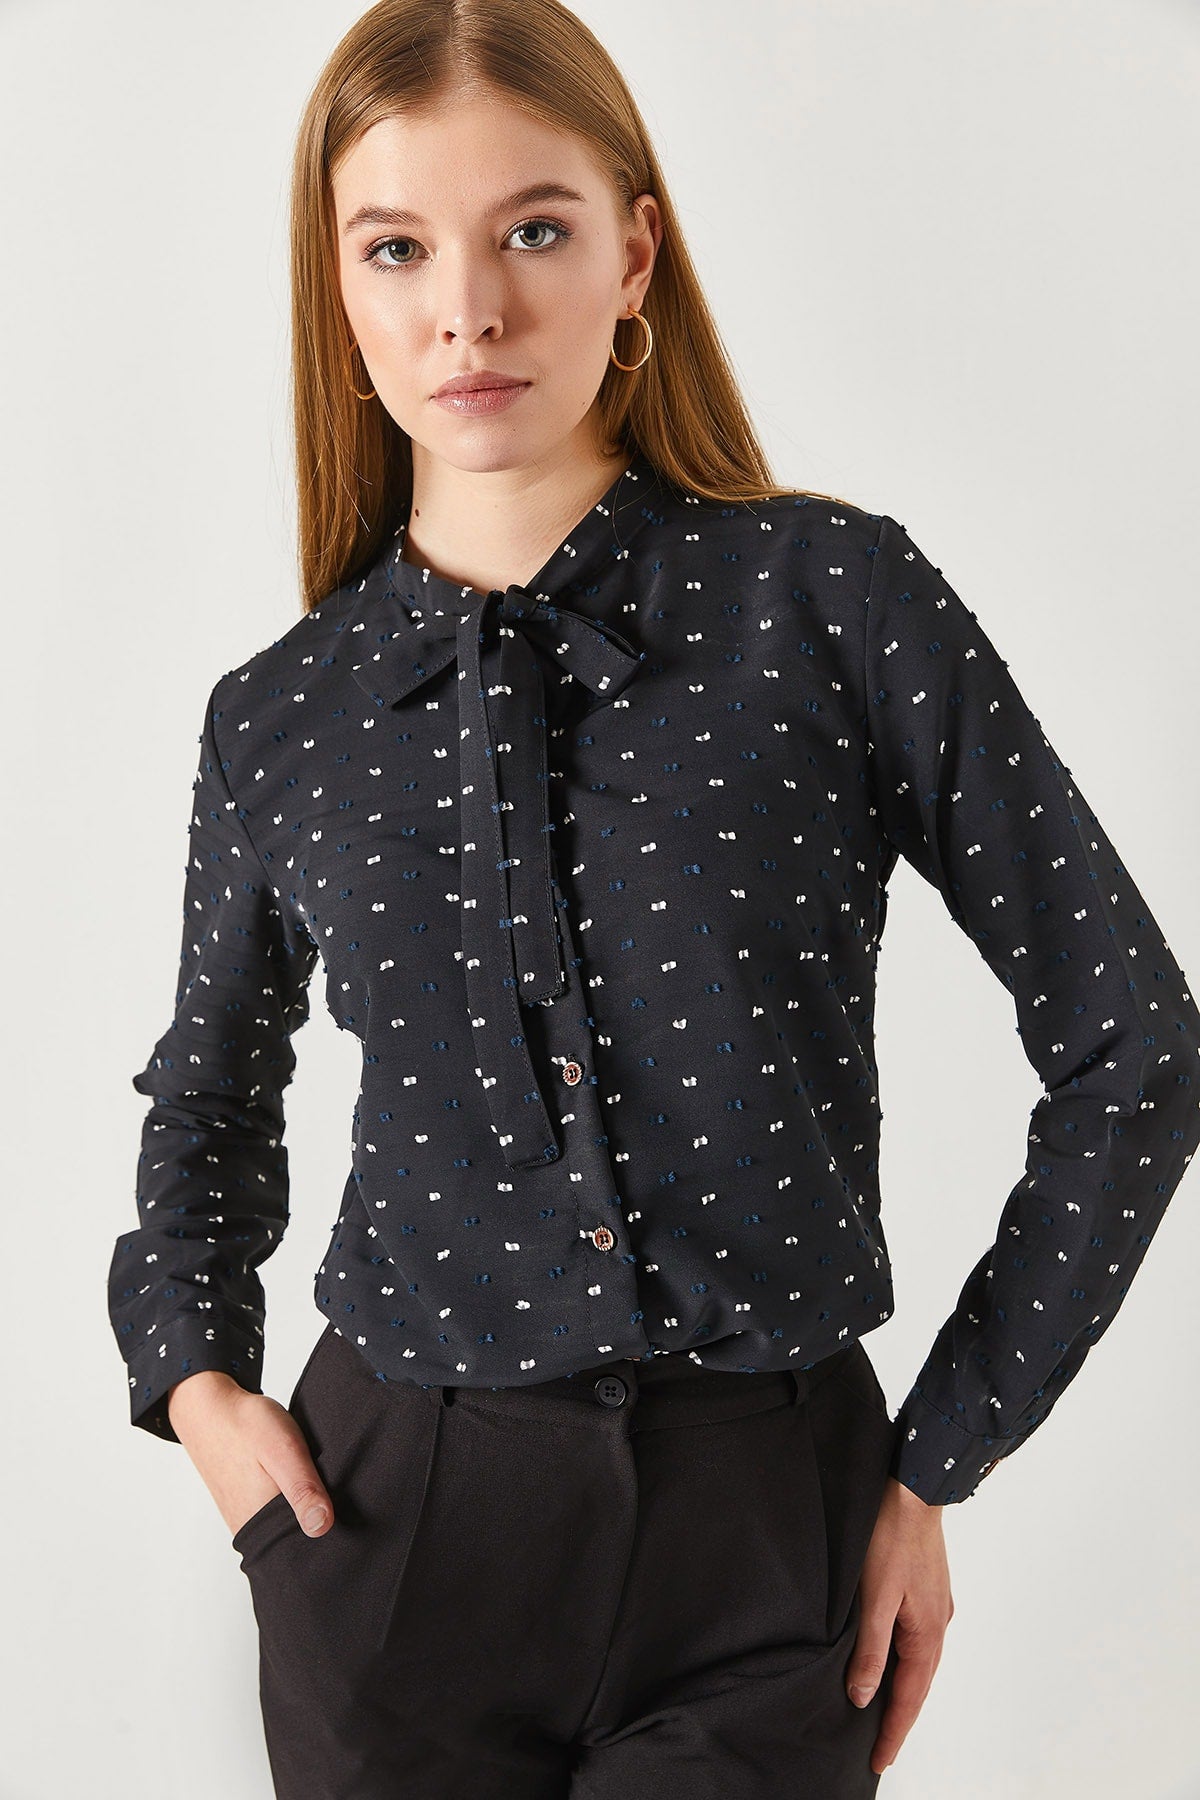 Female black collar connected patterned shirt ARM-221183